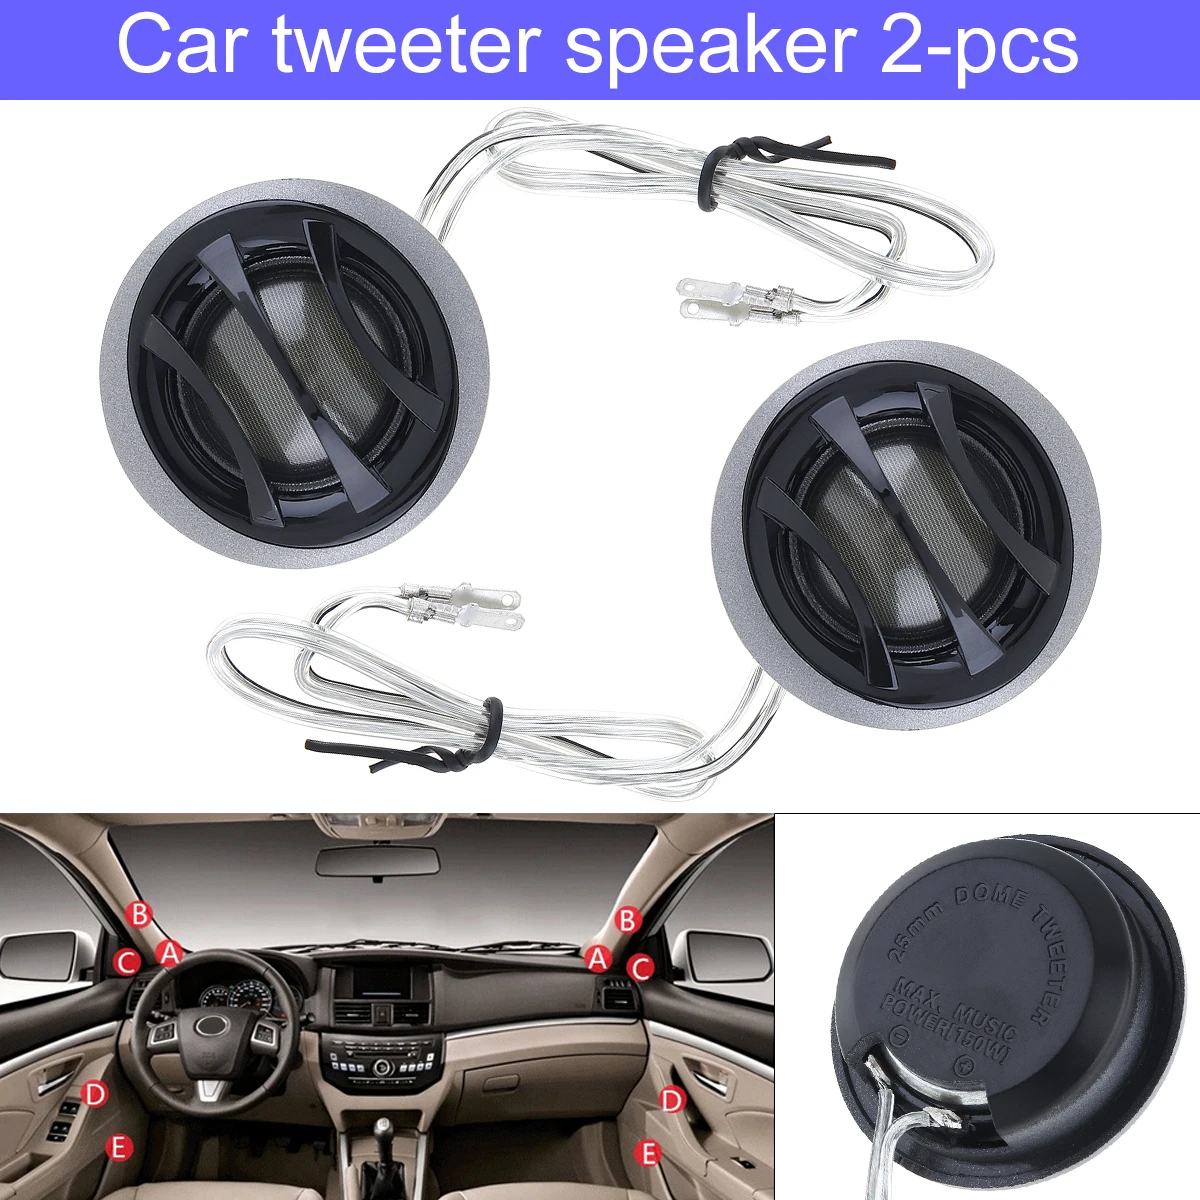 

2pcs 150W YH-520 25mm Instant Installation High Efficiency Dome Tweeter Speakers for Car Audio System